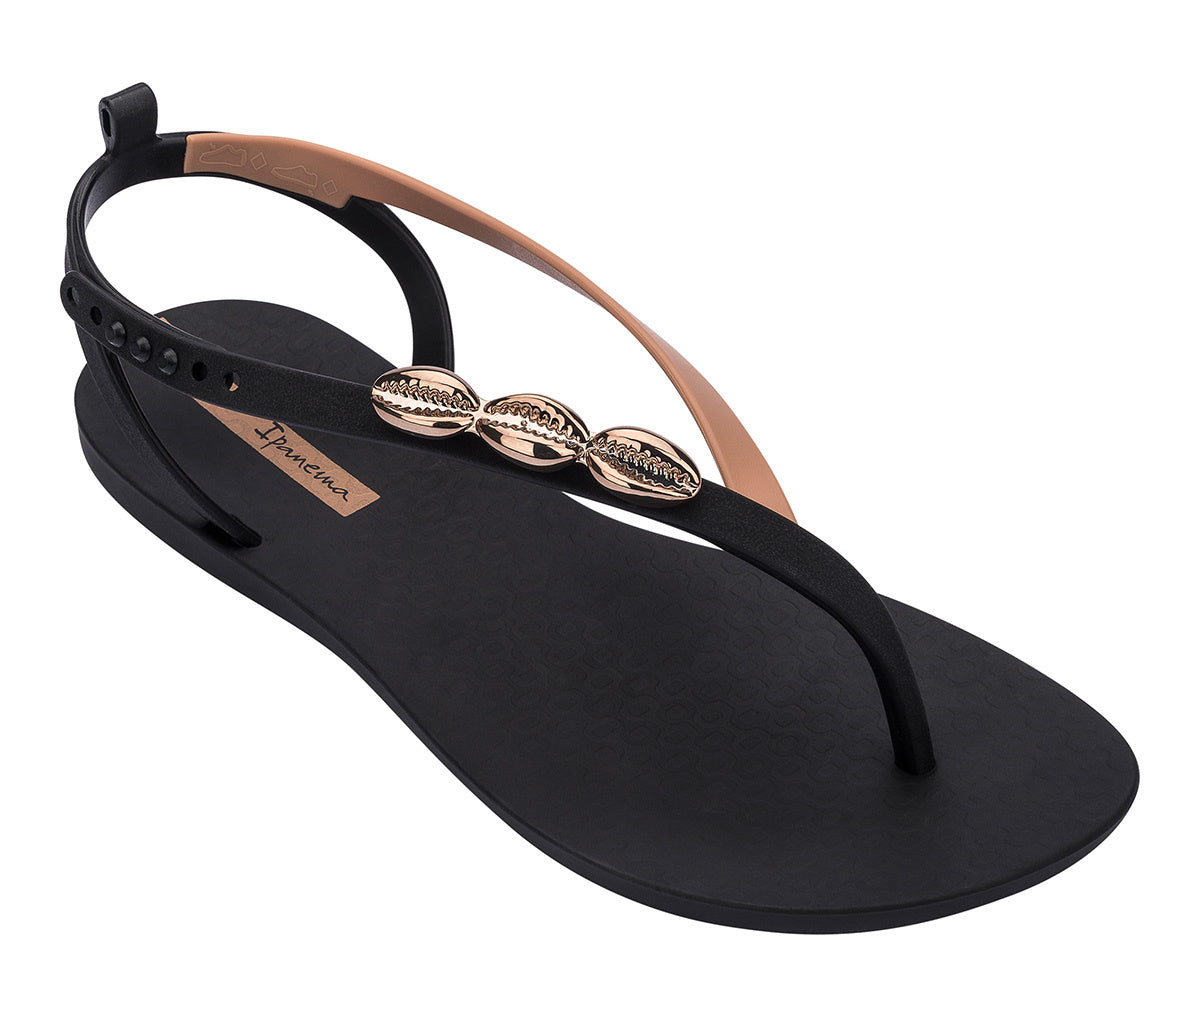 Angled view of a black Ipanema Salty women's sandal with 3 gold shells on the strap.